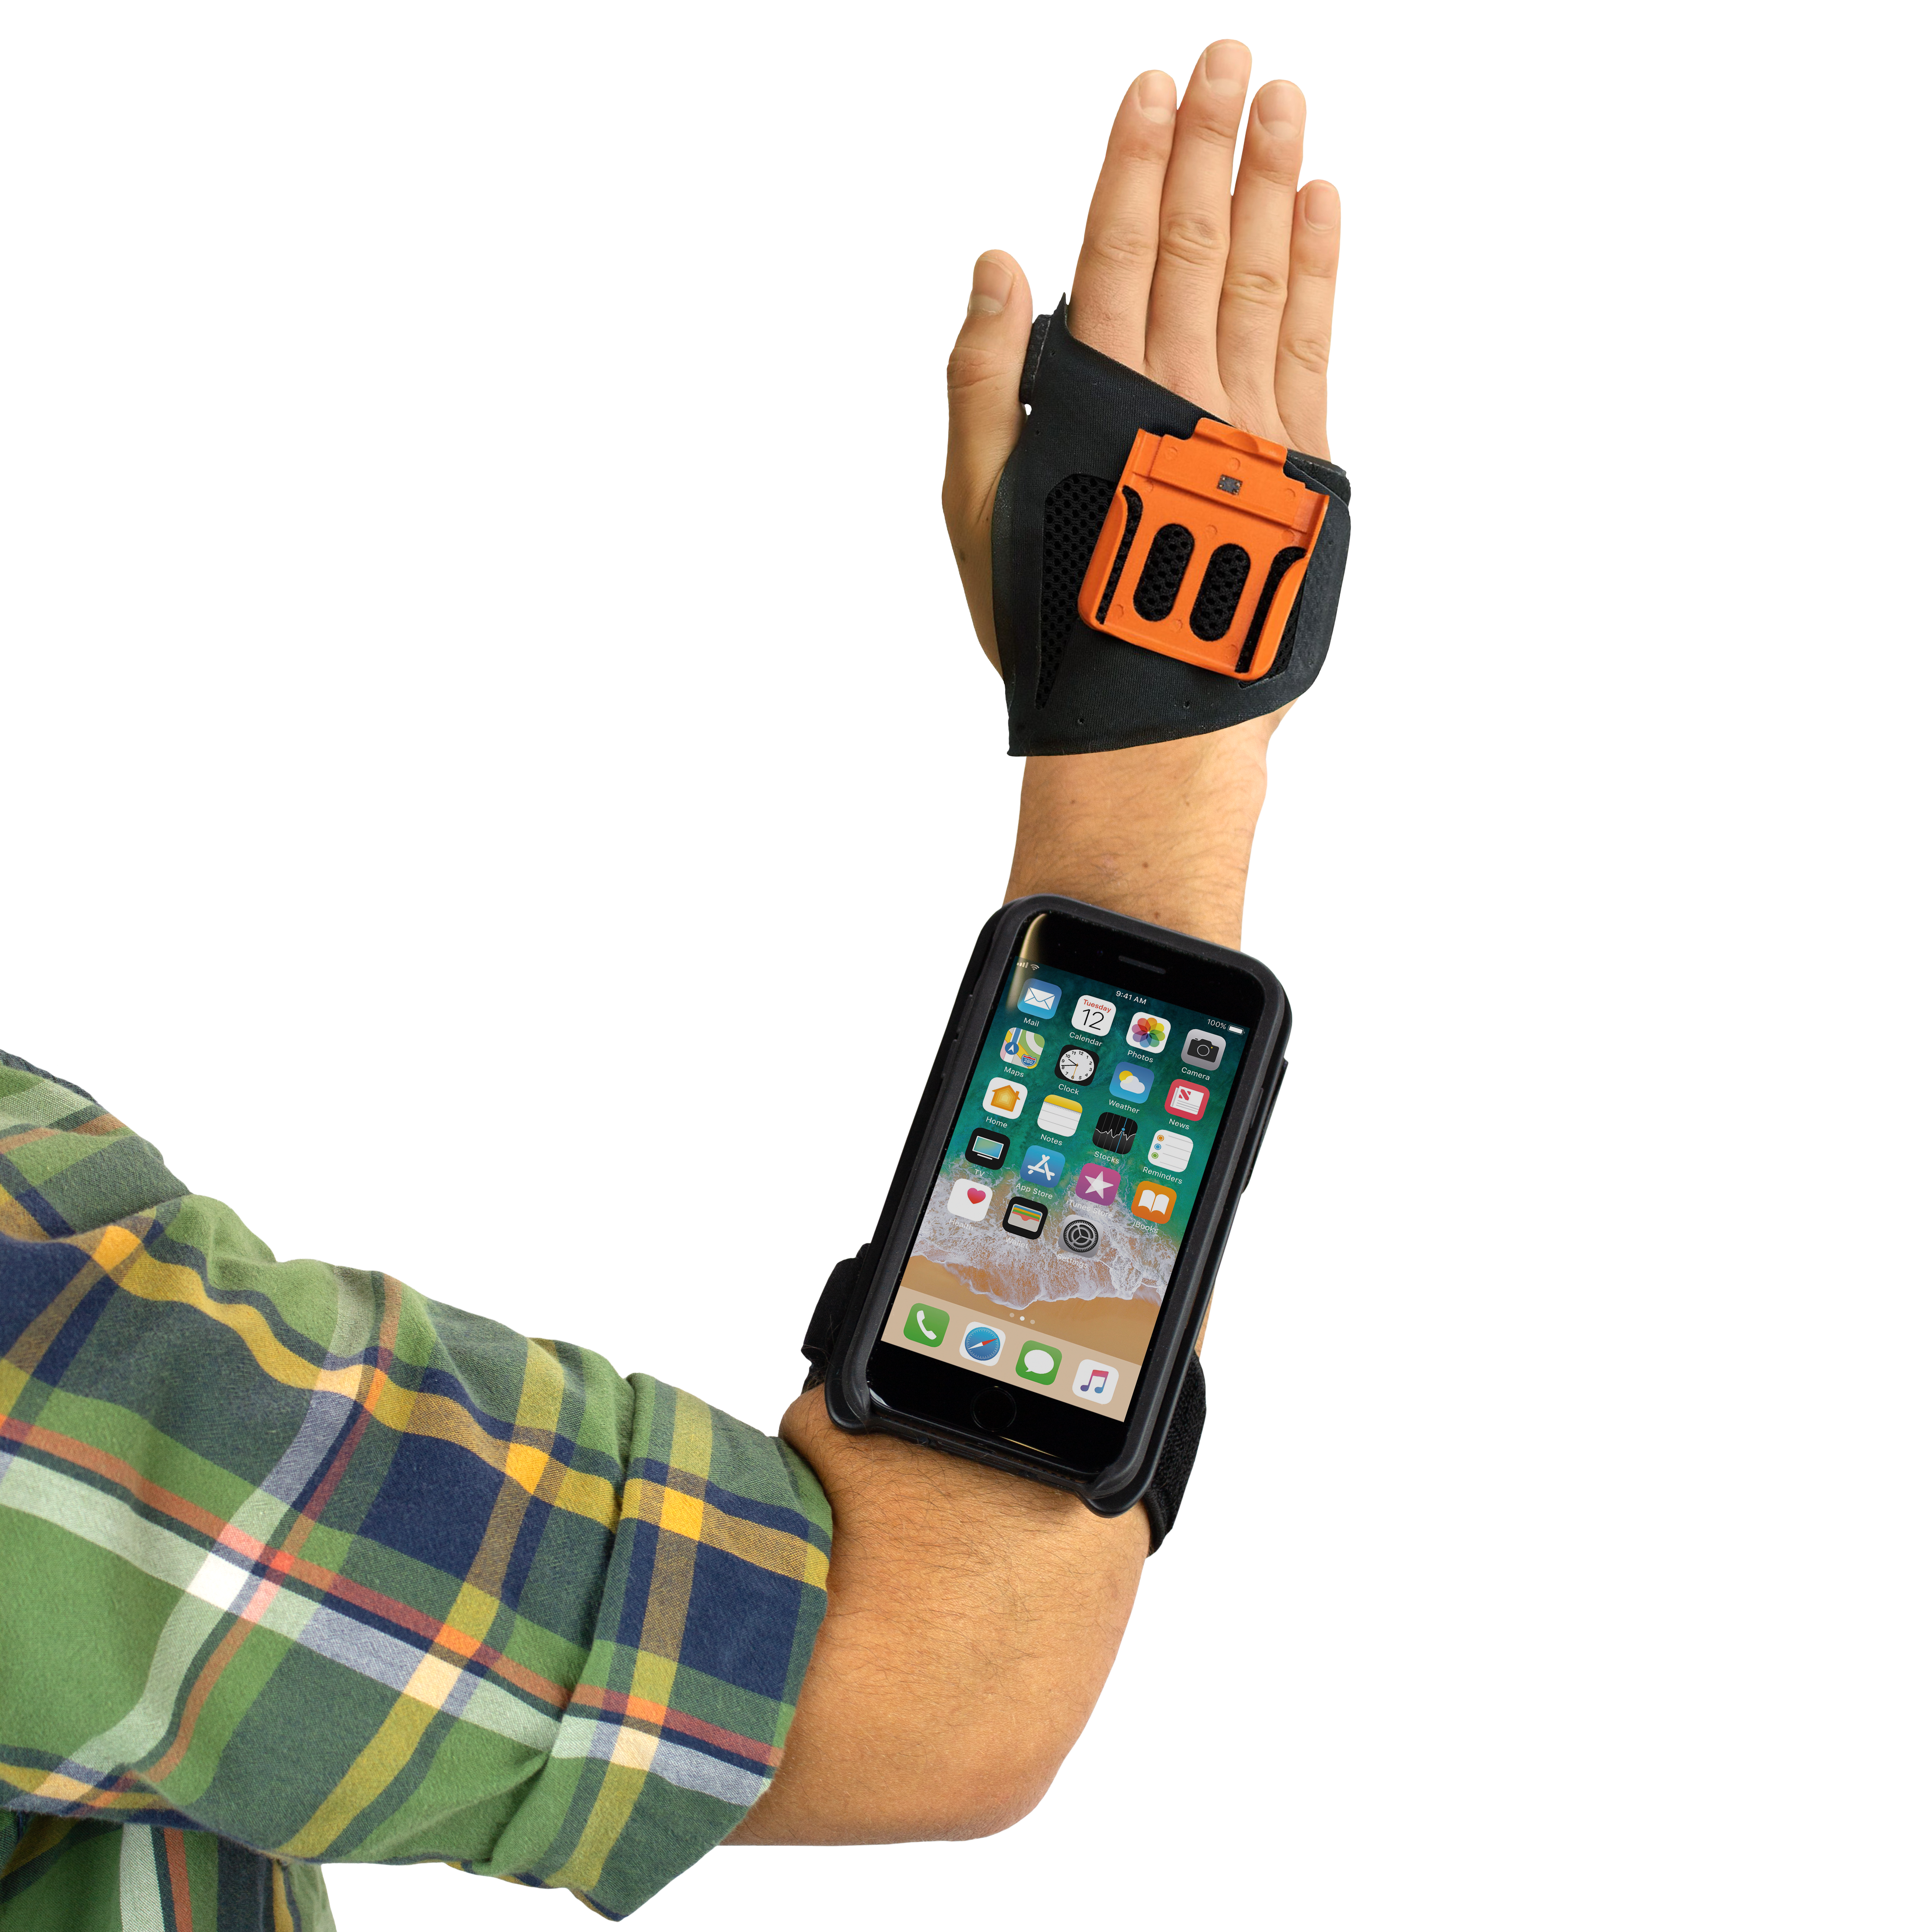 Smartphone Forearm Cradle for OtterBox uniVERSE